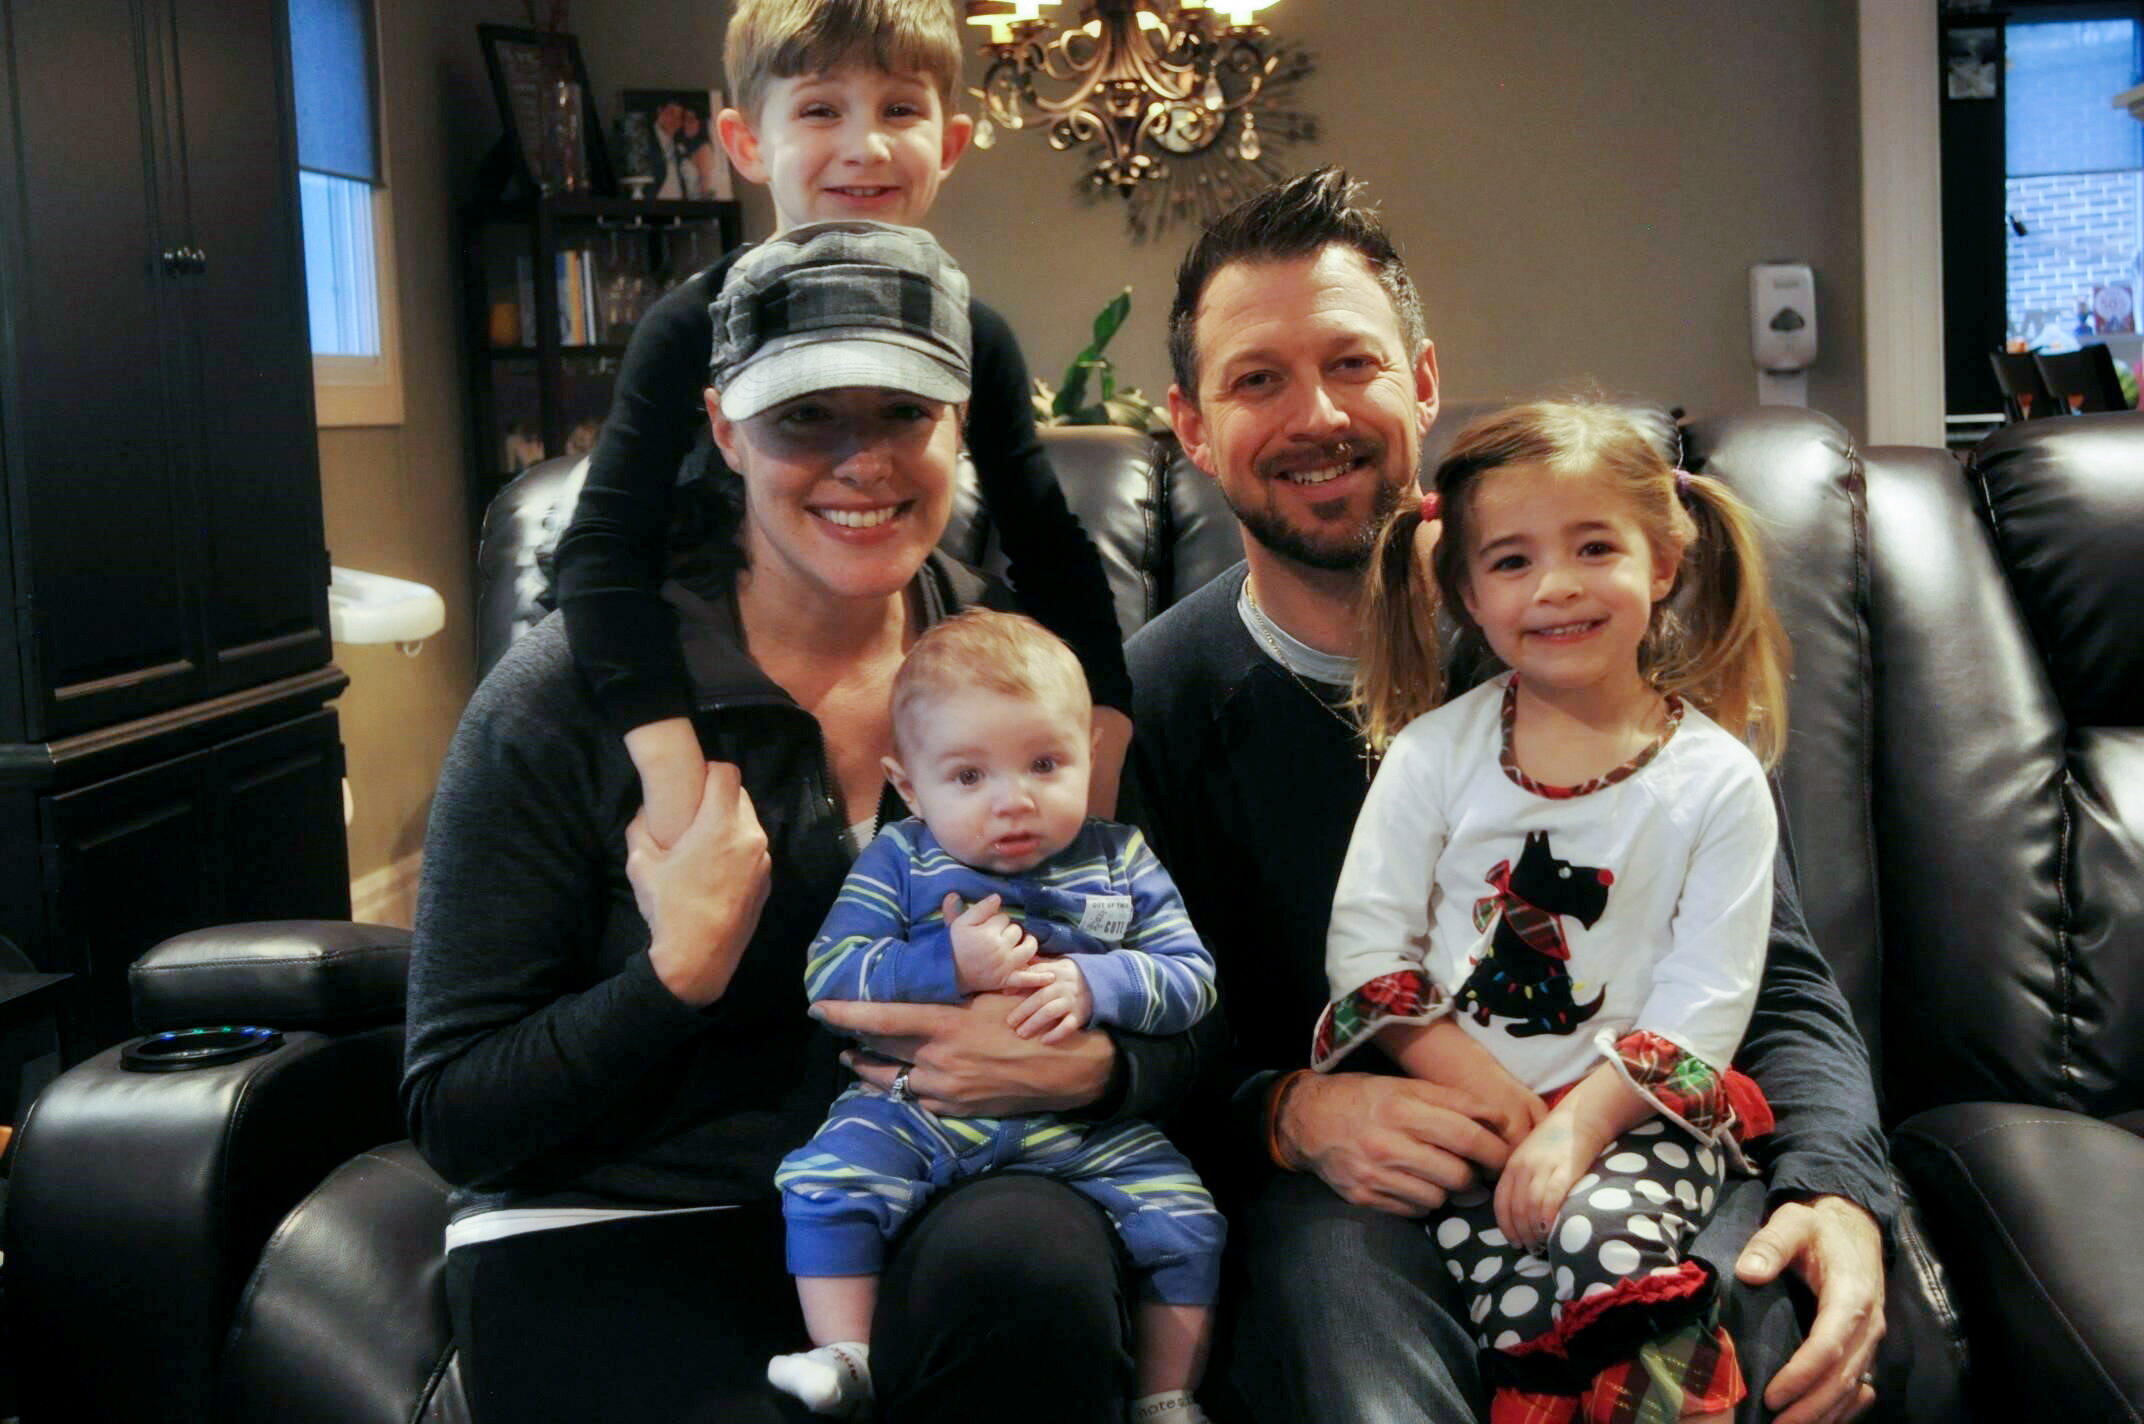 PHOTO: Lucy Eliopulos, 37, who is battling brain cancer, is seen in this undated photo with her husband Zack, and their children, Benjamin, 5, Julianna, 3 and George, 5 months. 